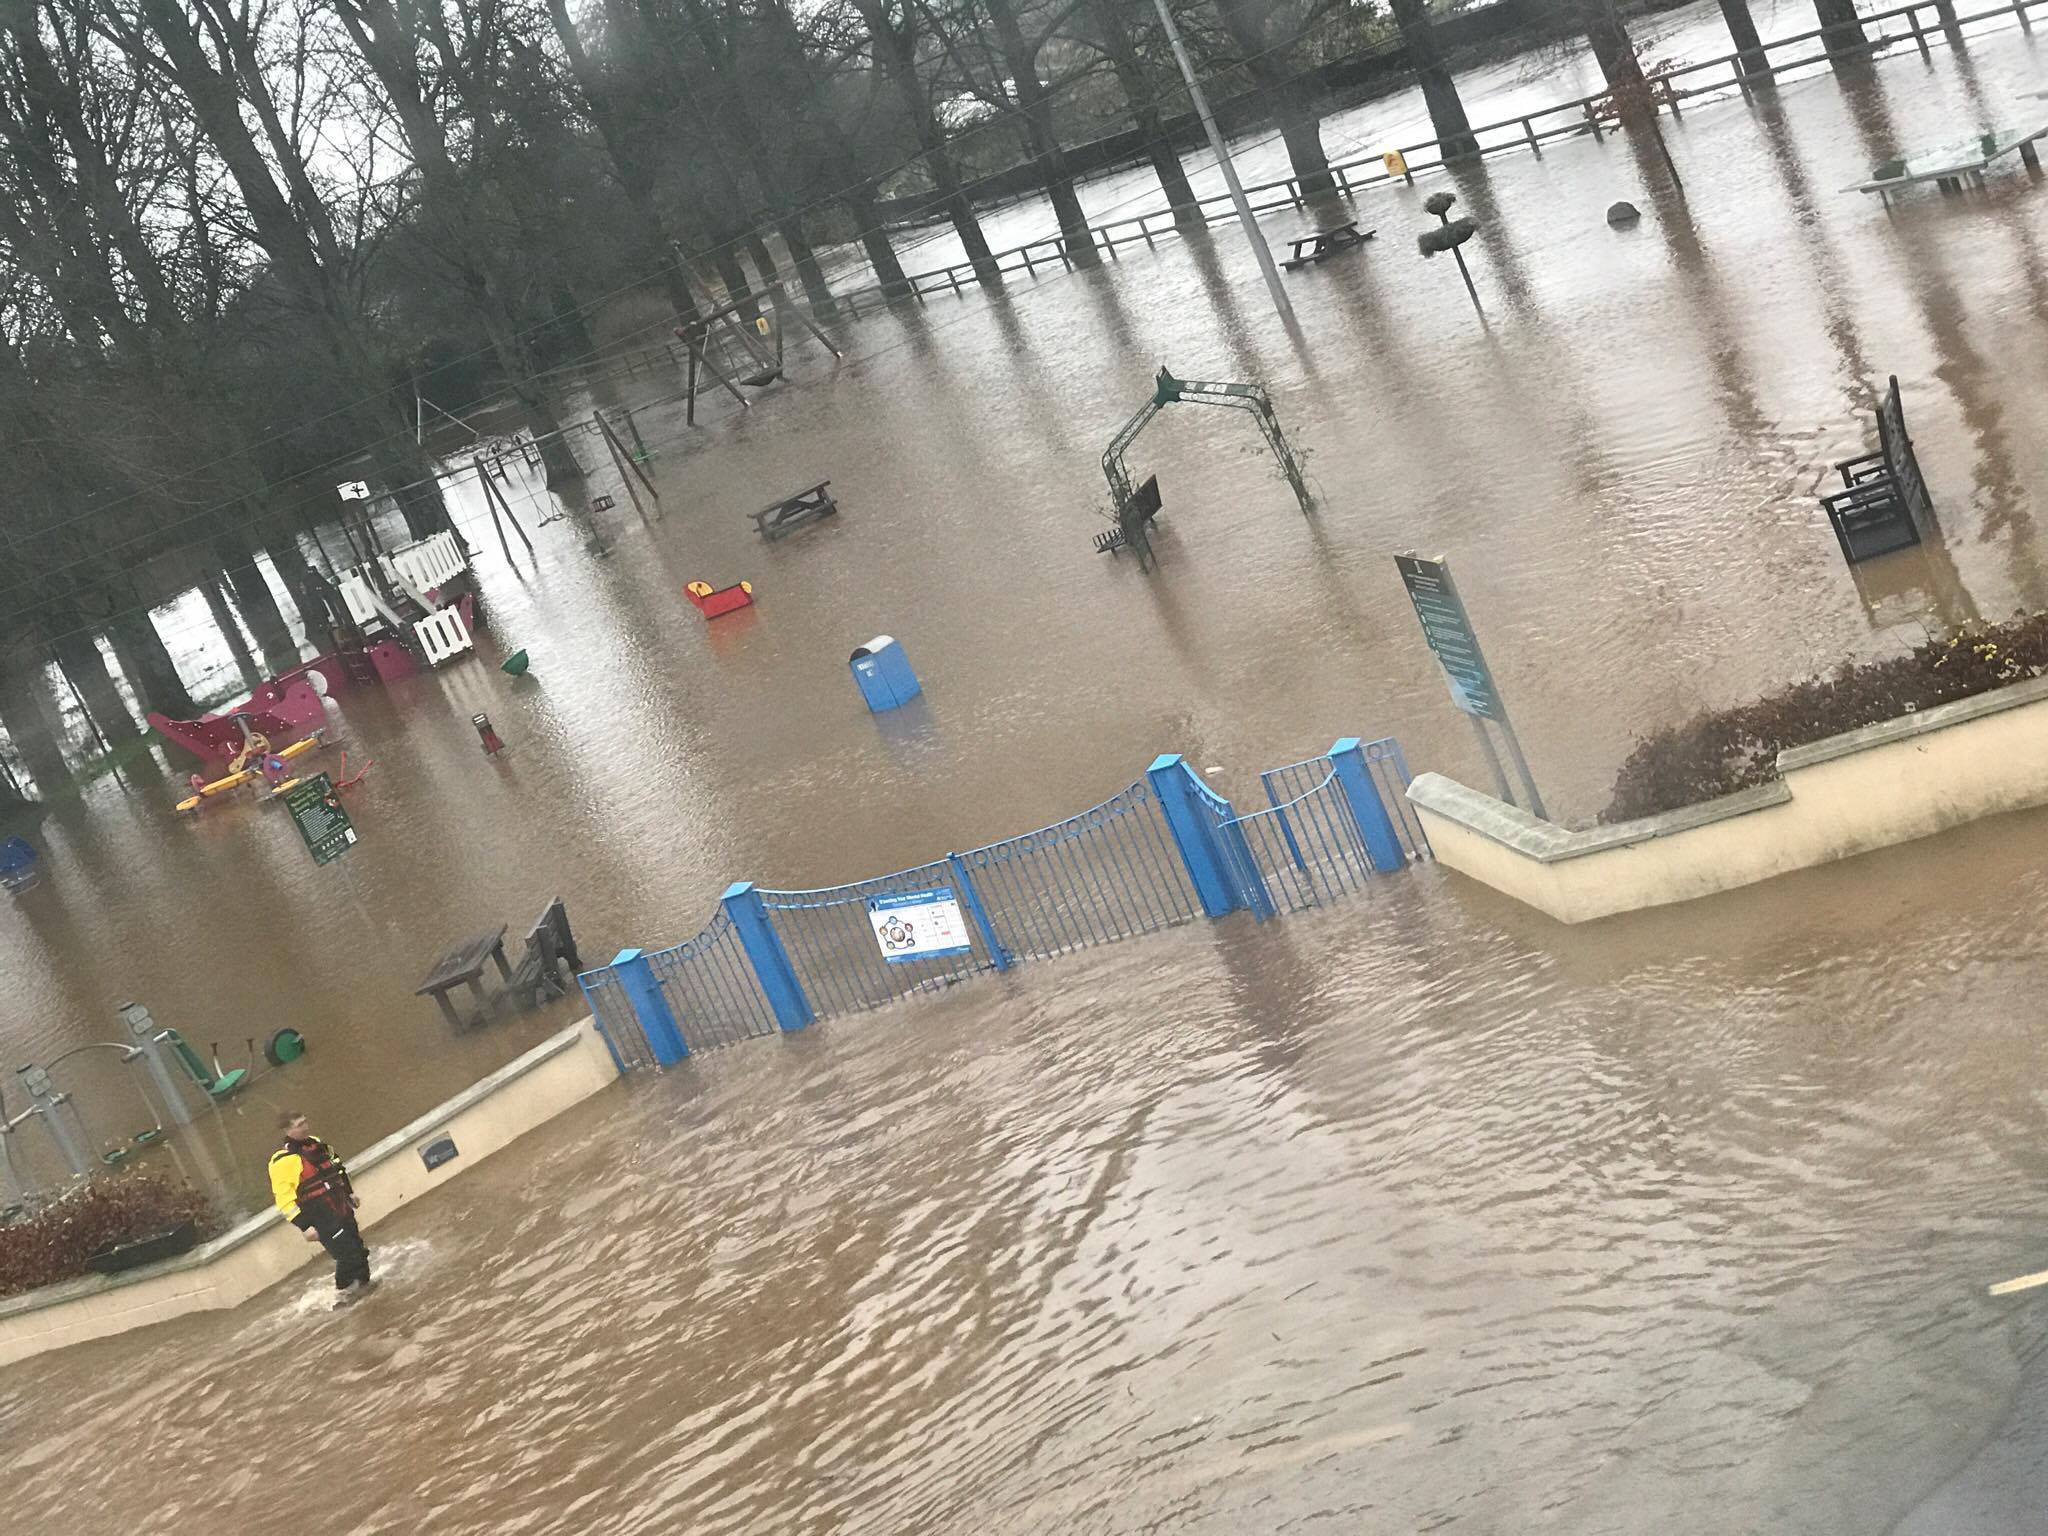 The playground is completely flooded in Mountmellick